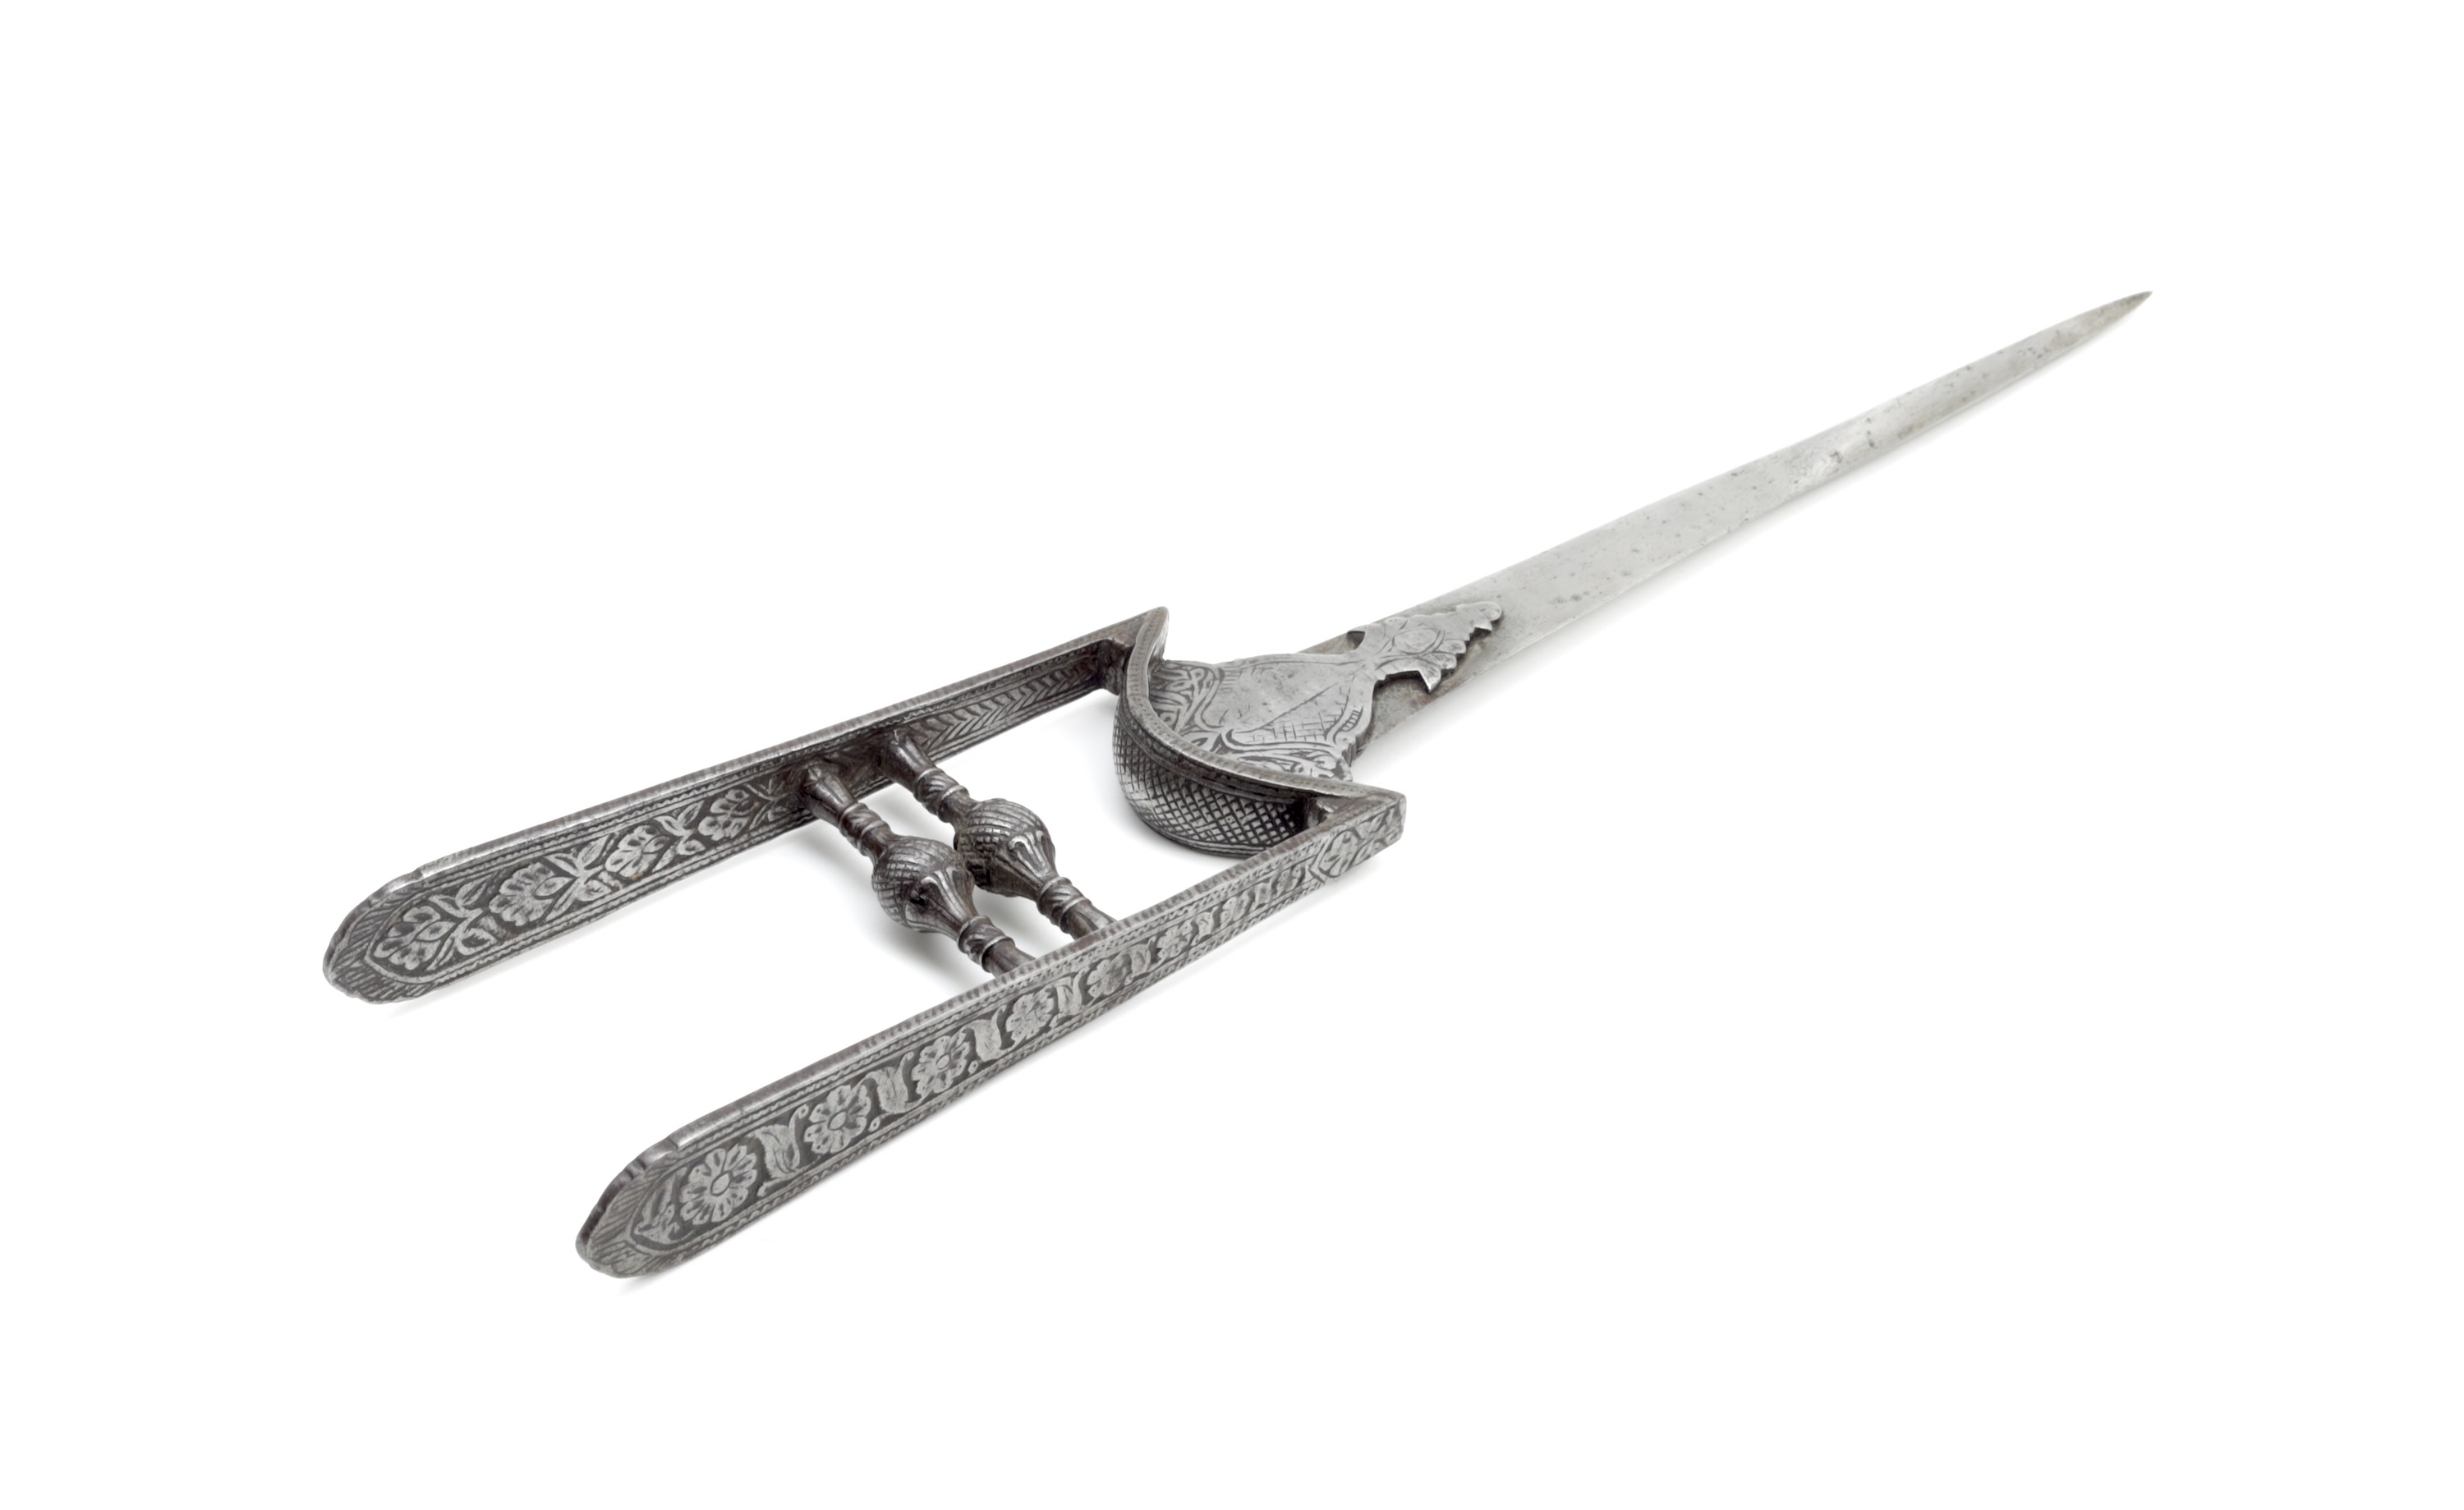 Southern katar with piercing blade